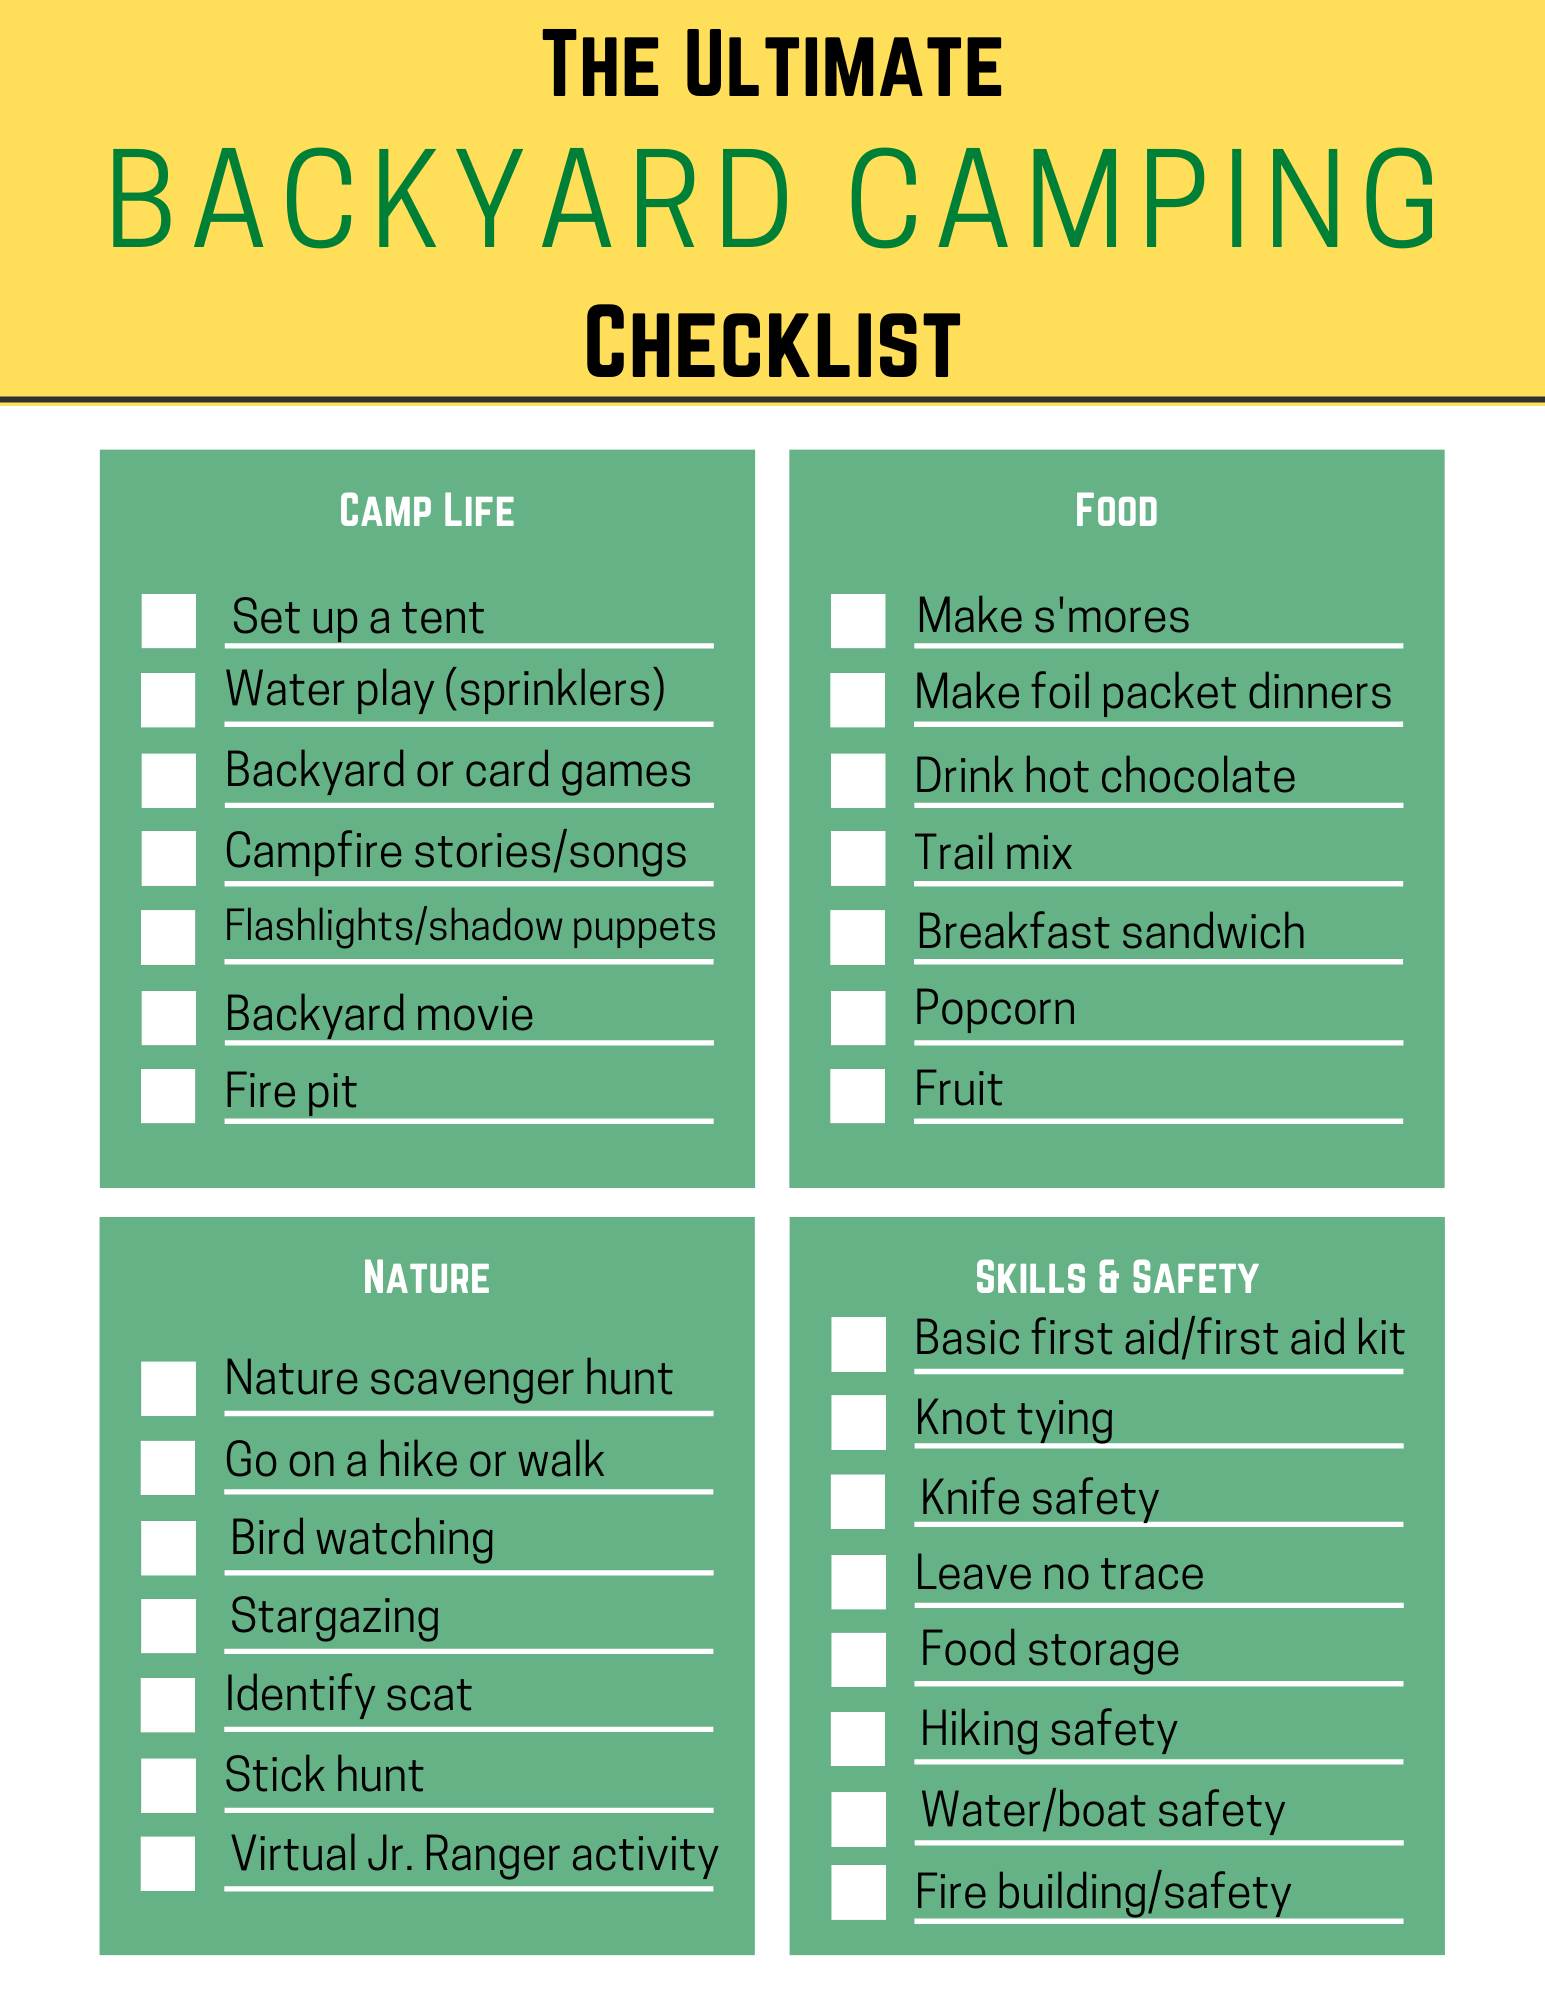 Camping Checklist Essentials, The Necessities You Need When Camping, Shelter, Cooking, Personal Item…